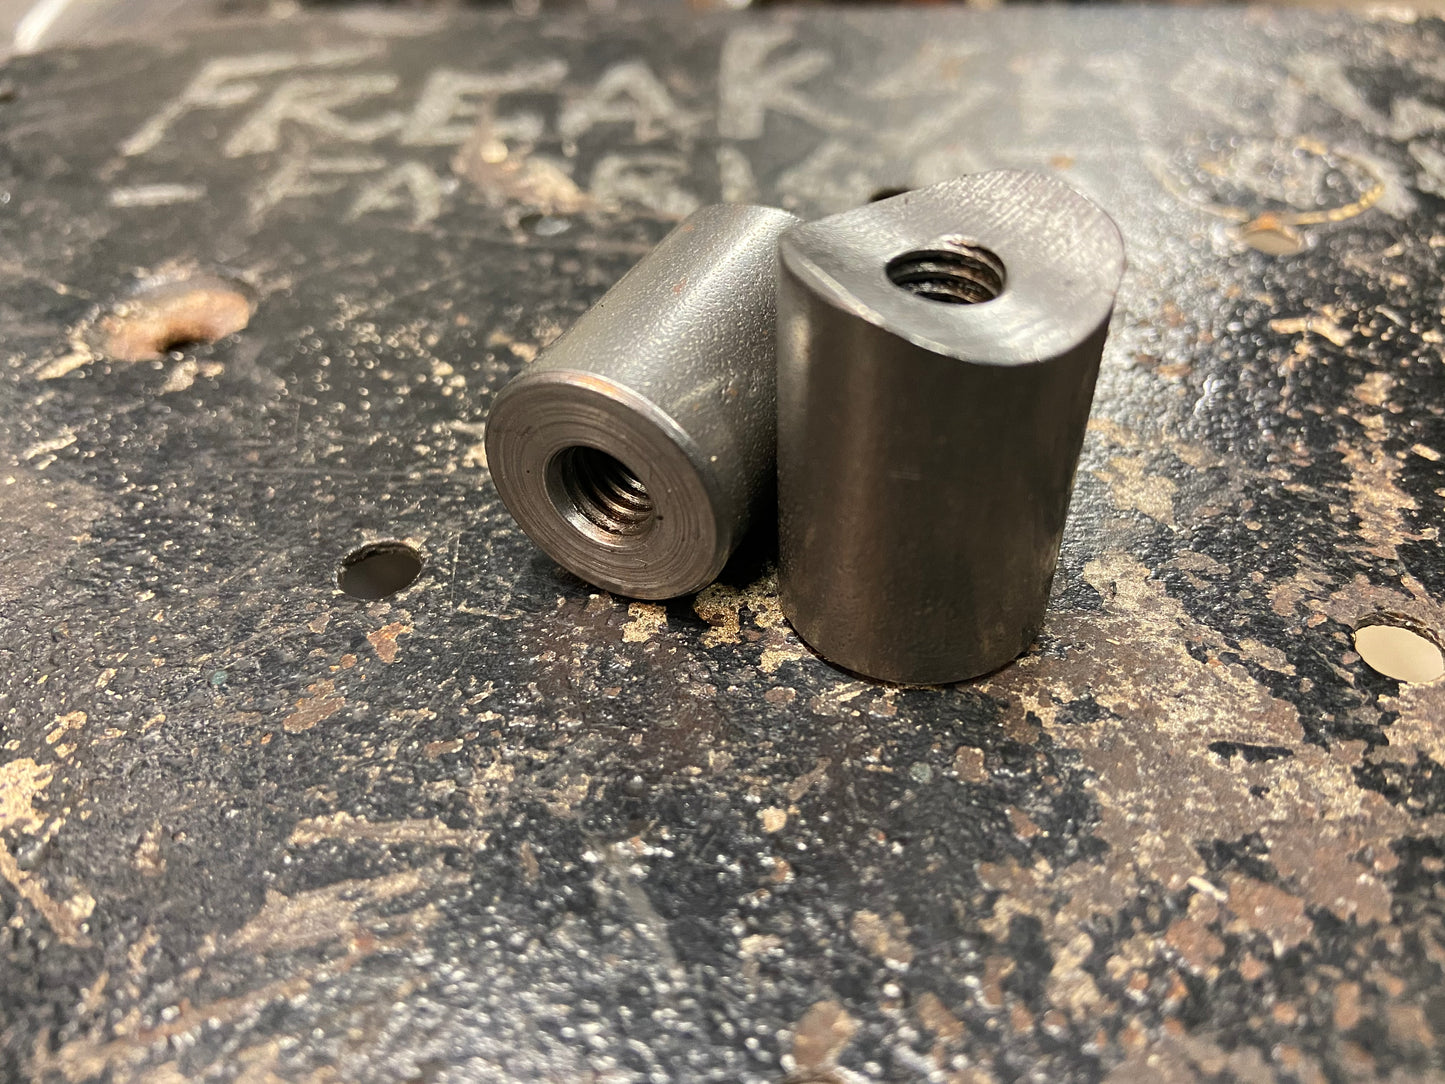 5/16 mild Steel 1” long Fishmouth Bung